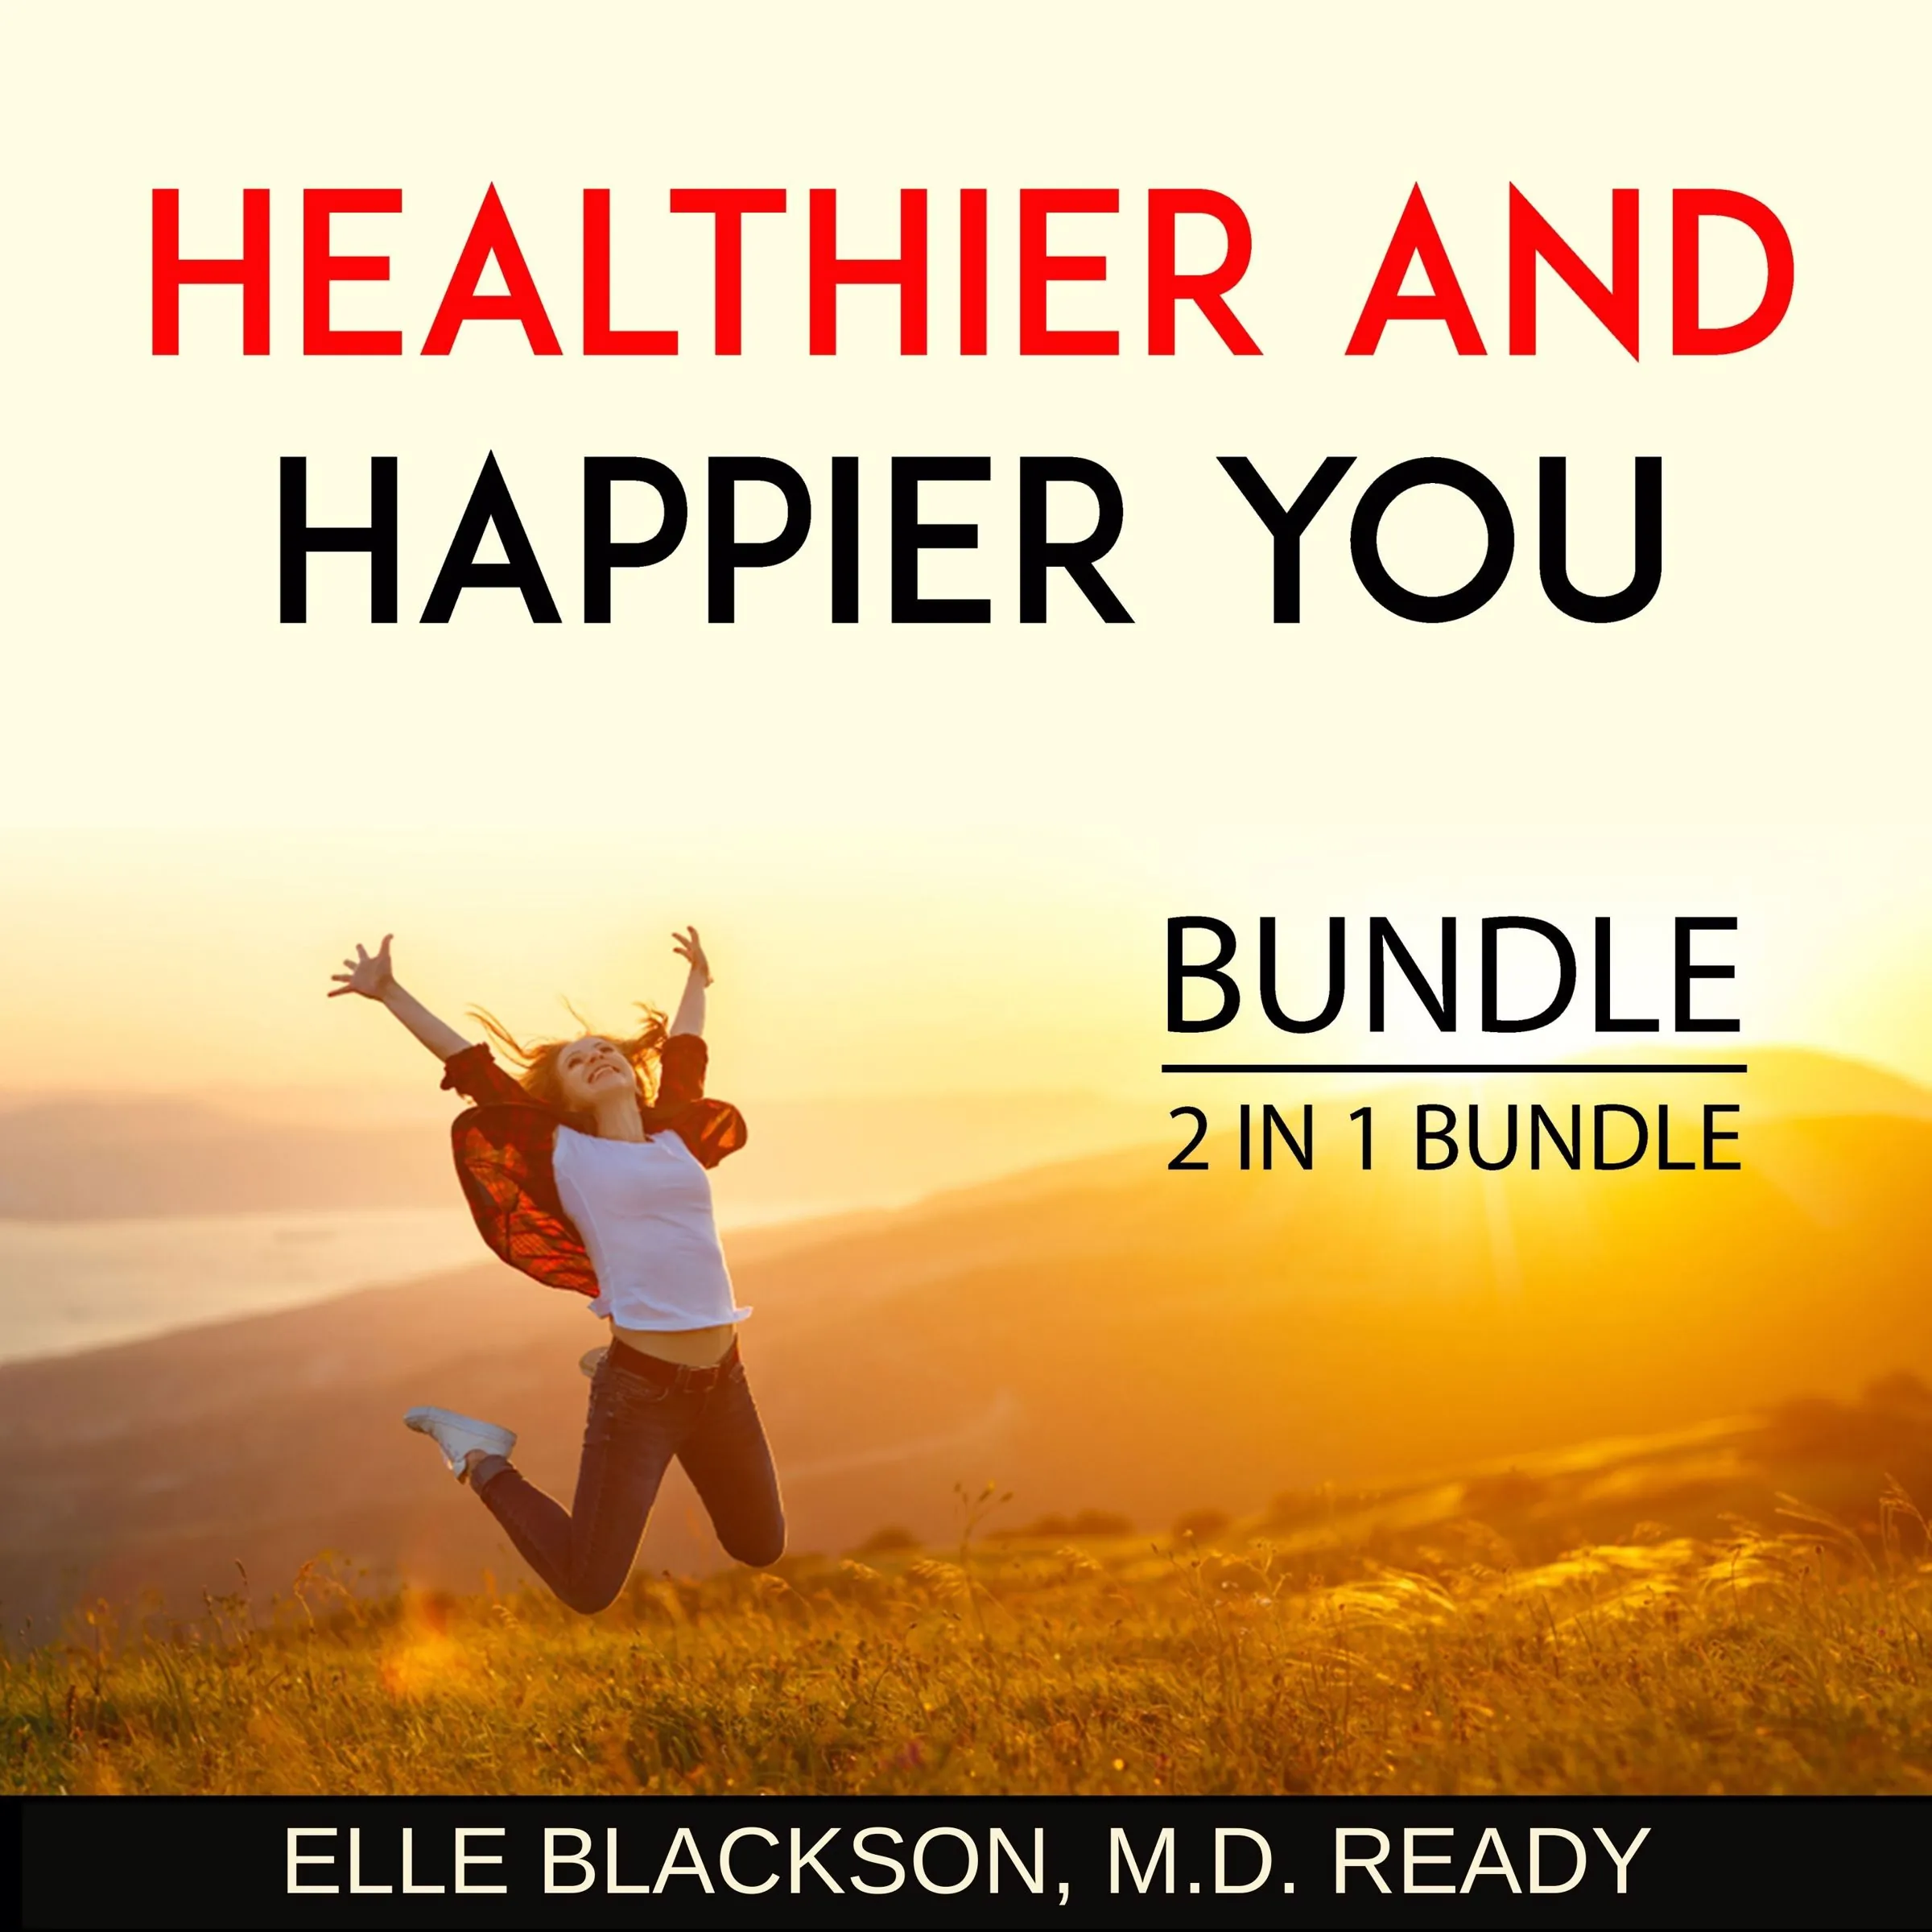 Healthier and Happier You Bundle, 2 in 1 Bundle Audiobook by M.D. Ready